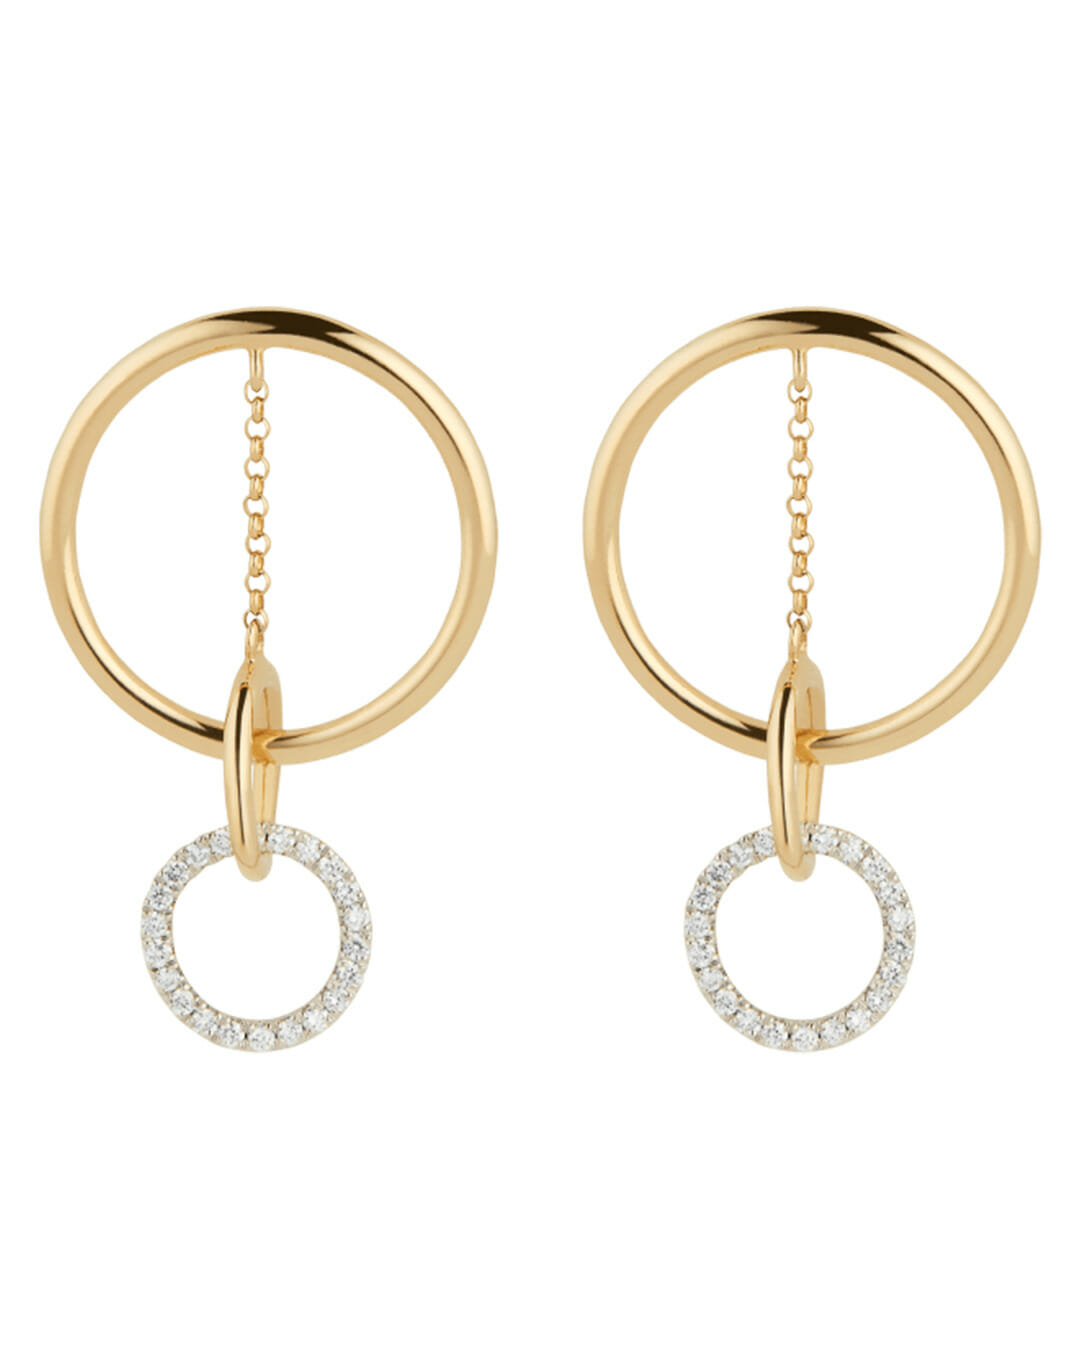 G. Label Jewelry Collection Earrings